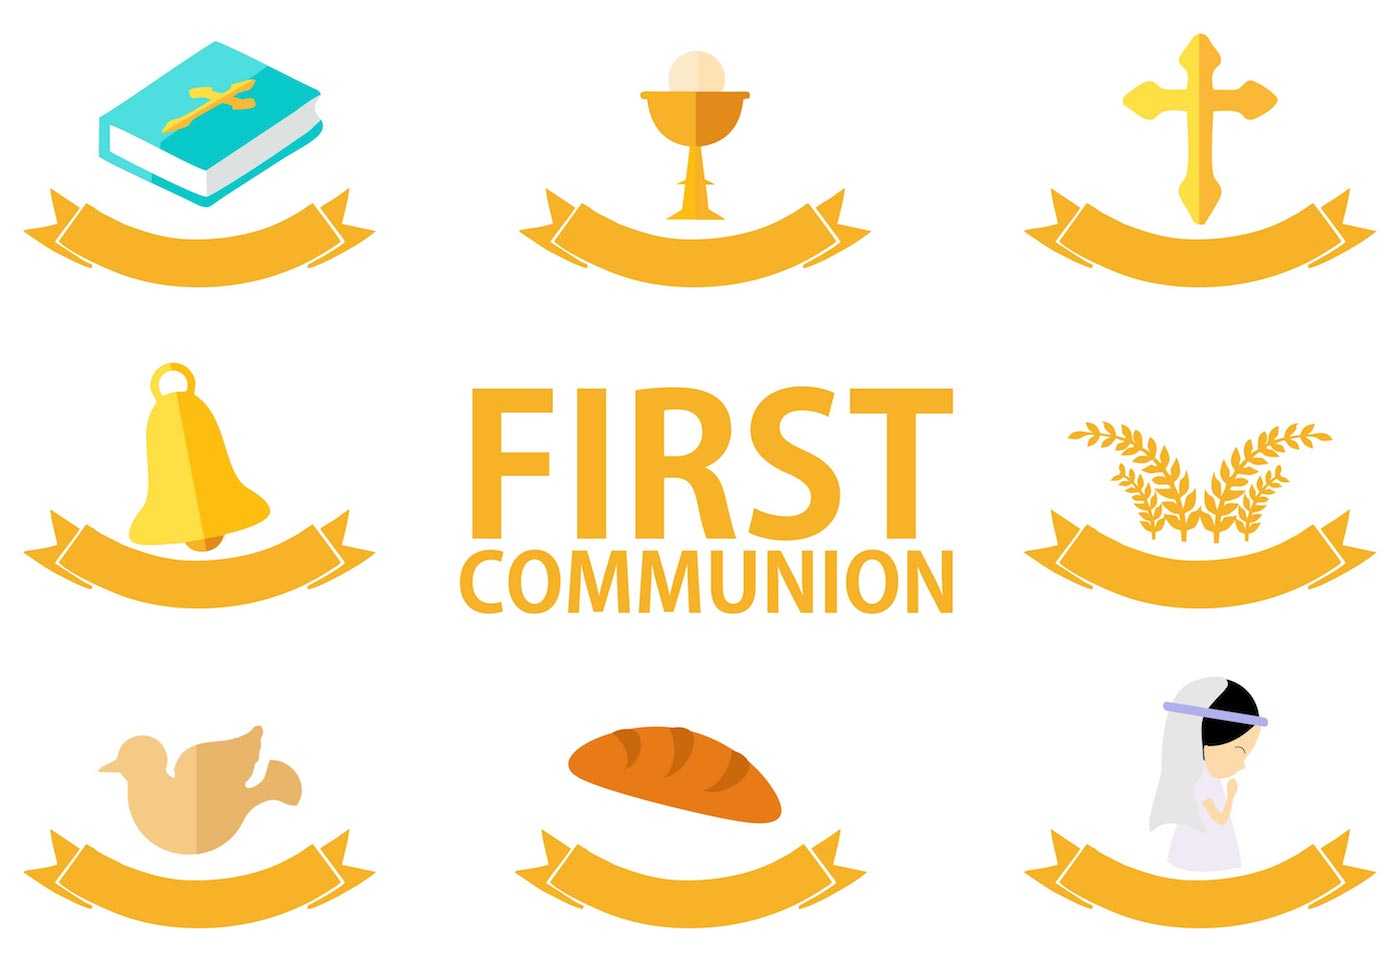 First Communion Template Free Vector Art – (25 Free Downloads) With Free Printable First Communion Banner Templates